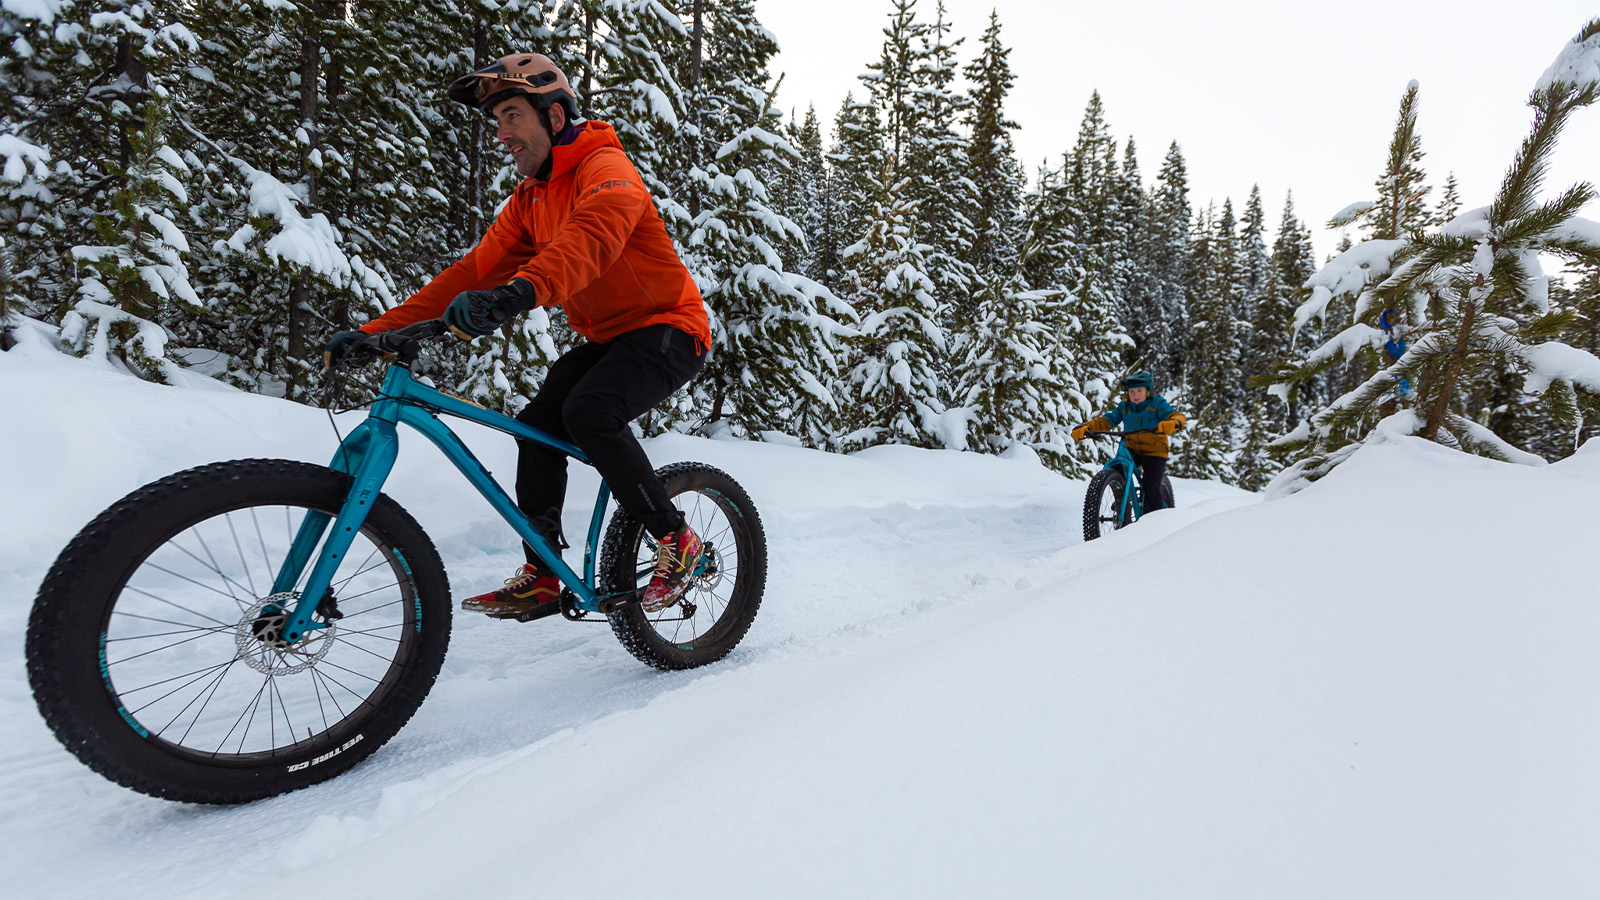 Group fat bikes on the trail at Wanoga SnoPark in Bend, Oregon.